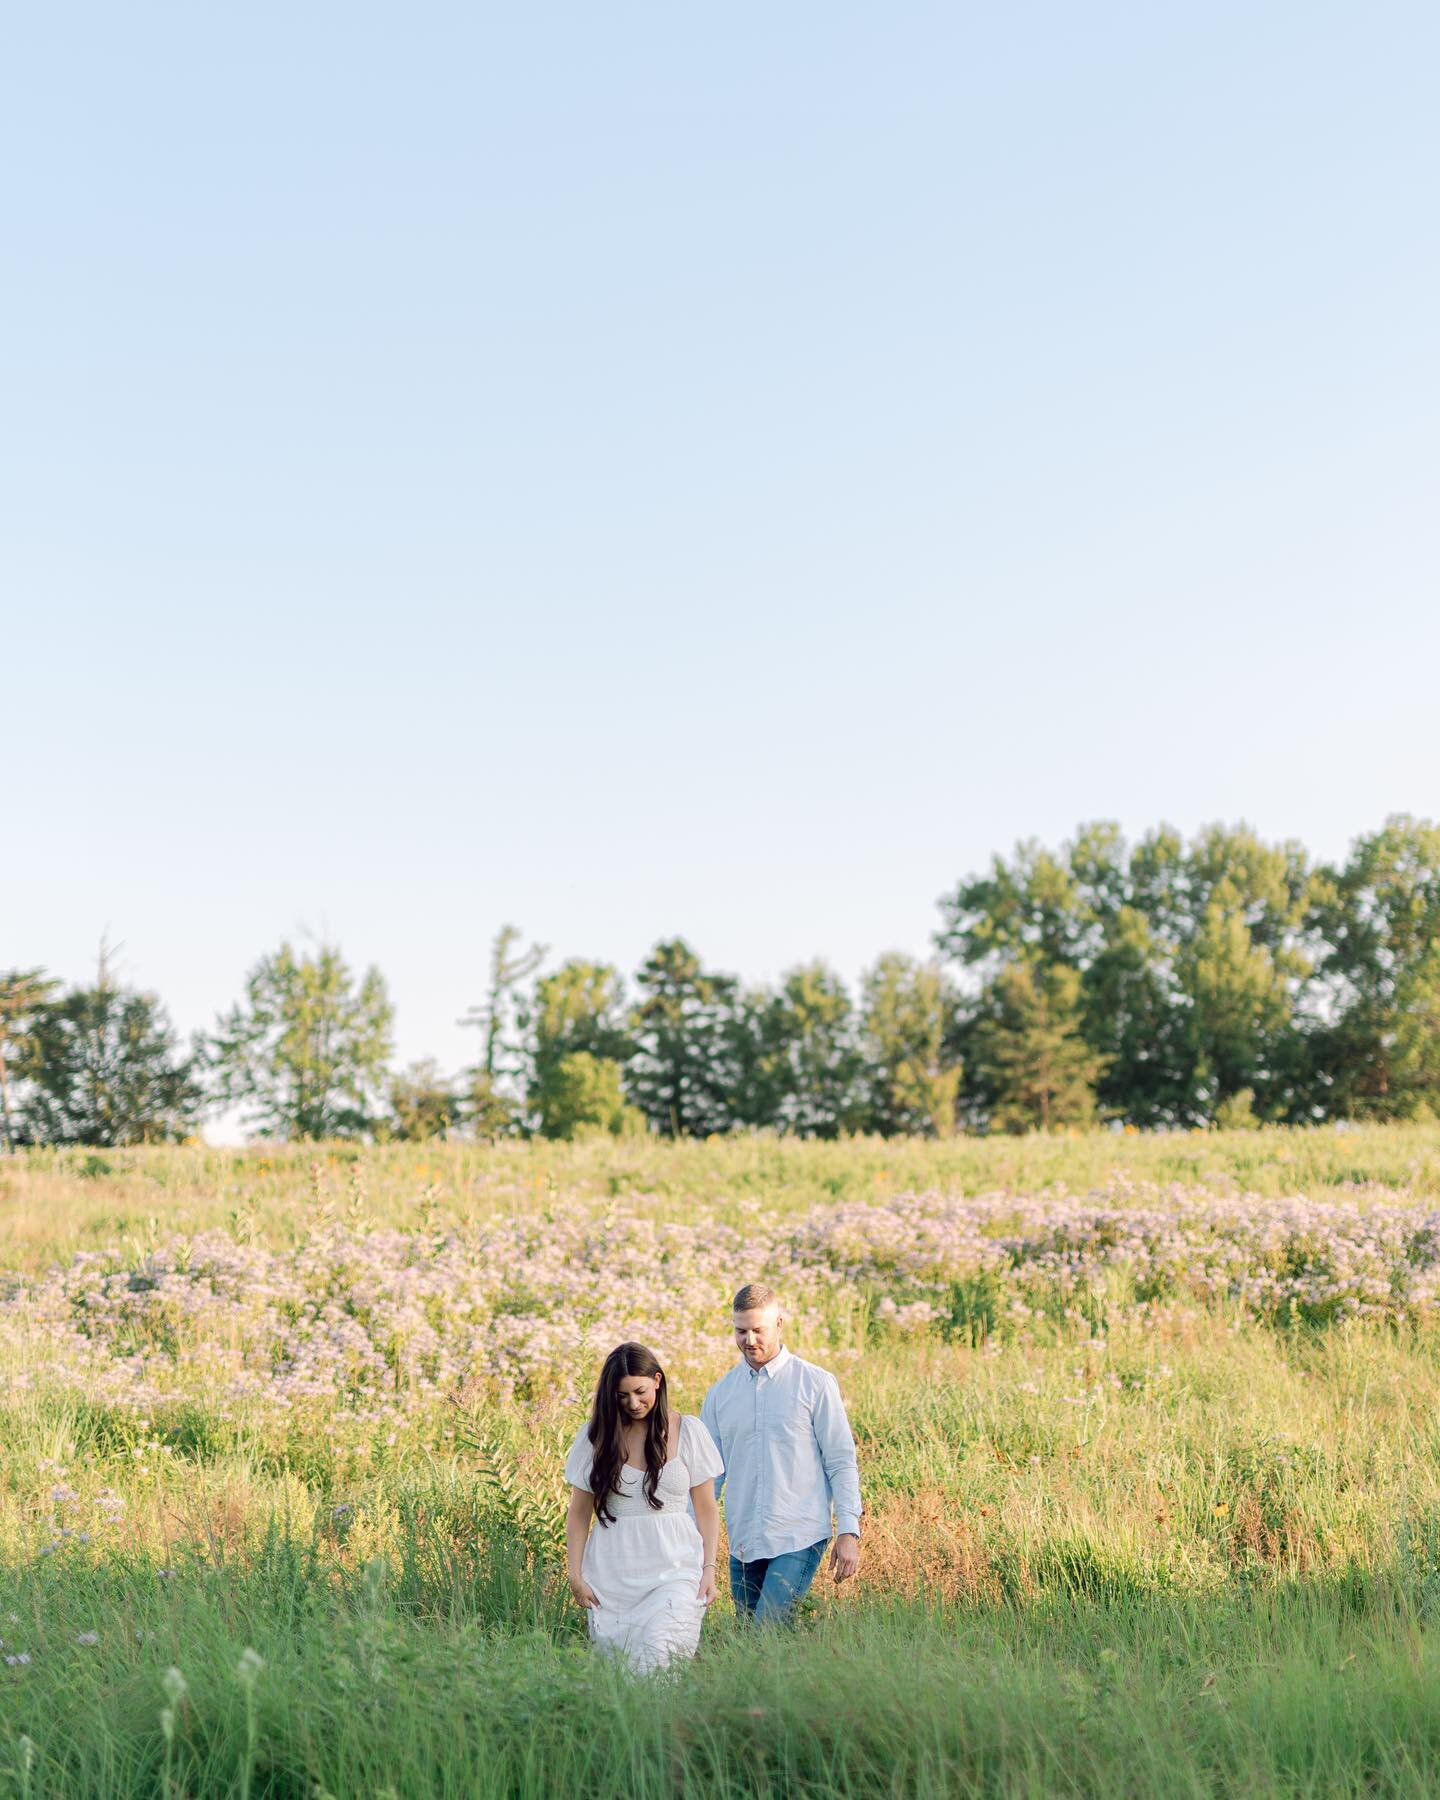 Using all 10 slides Instagram will give me to share these two 😍

You&rsquo;d never know we were picking ticks off us every 30 seconds 😬

#Illinoisphotographer #springfieldillinois #springfieldil #stlouis #stlphotographer #stlweddingphotographer #st